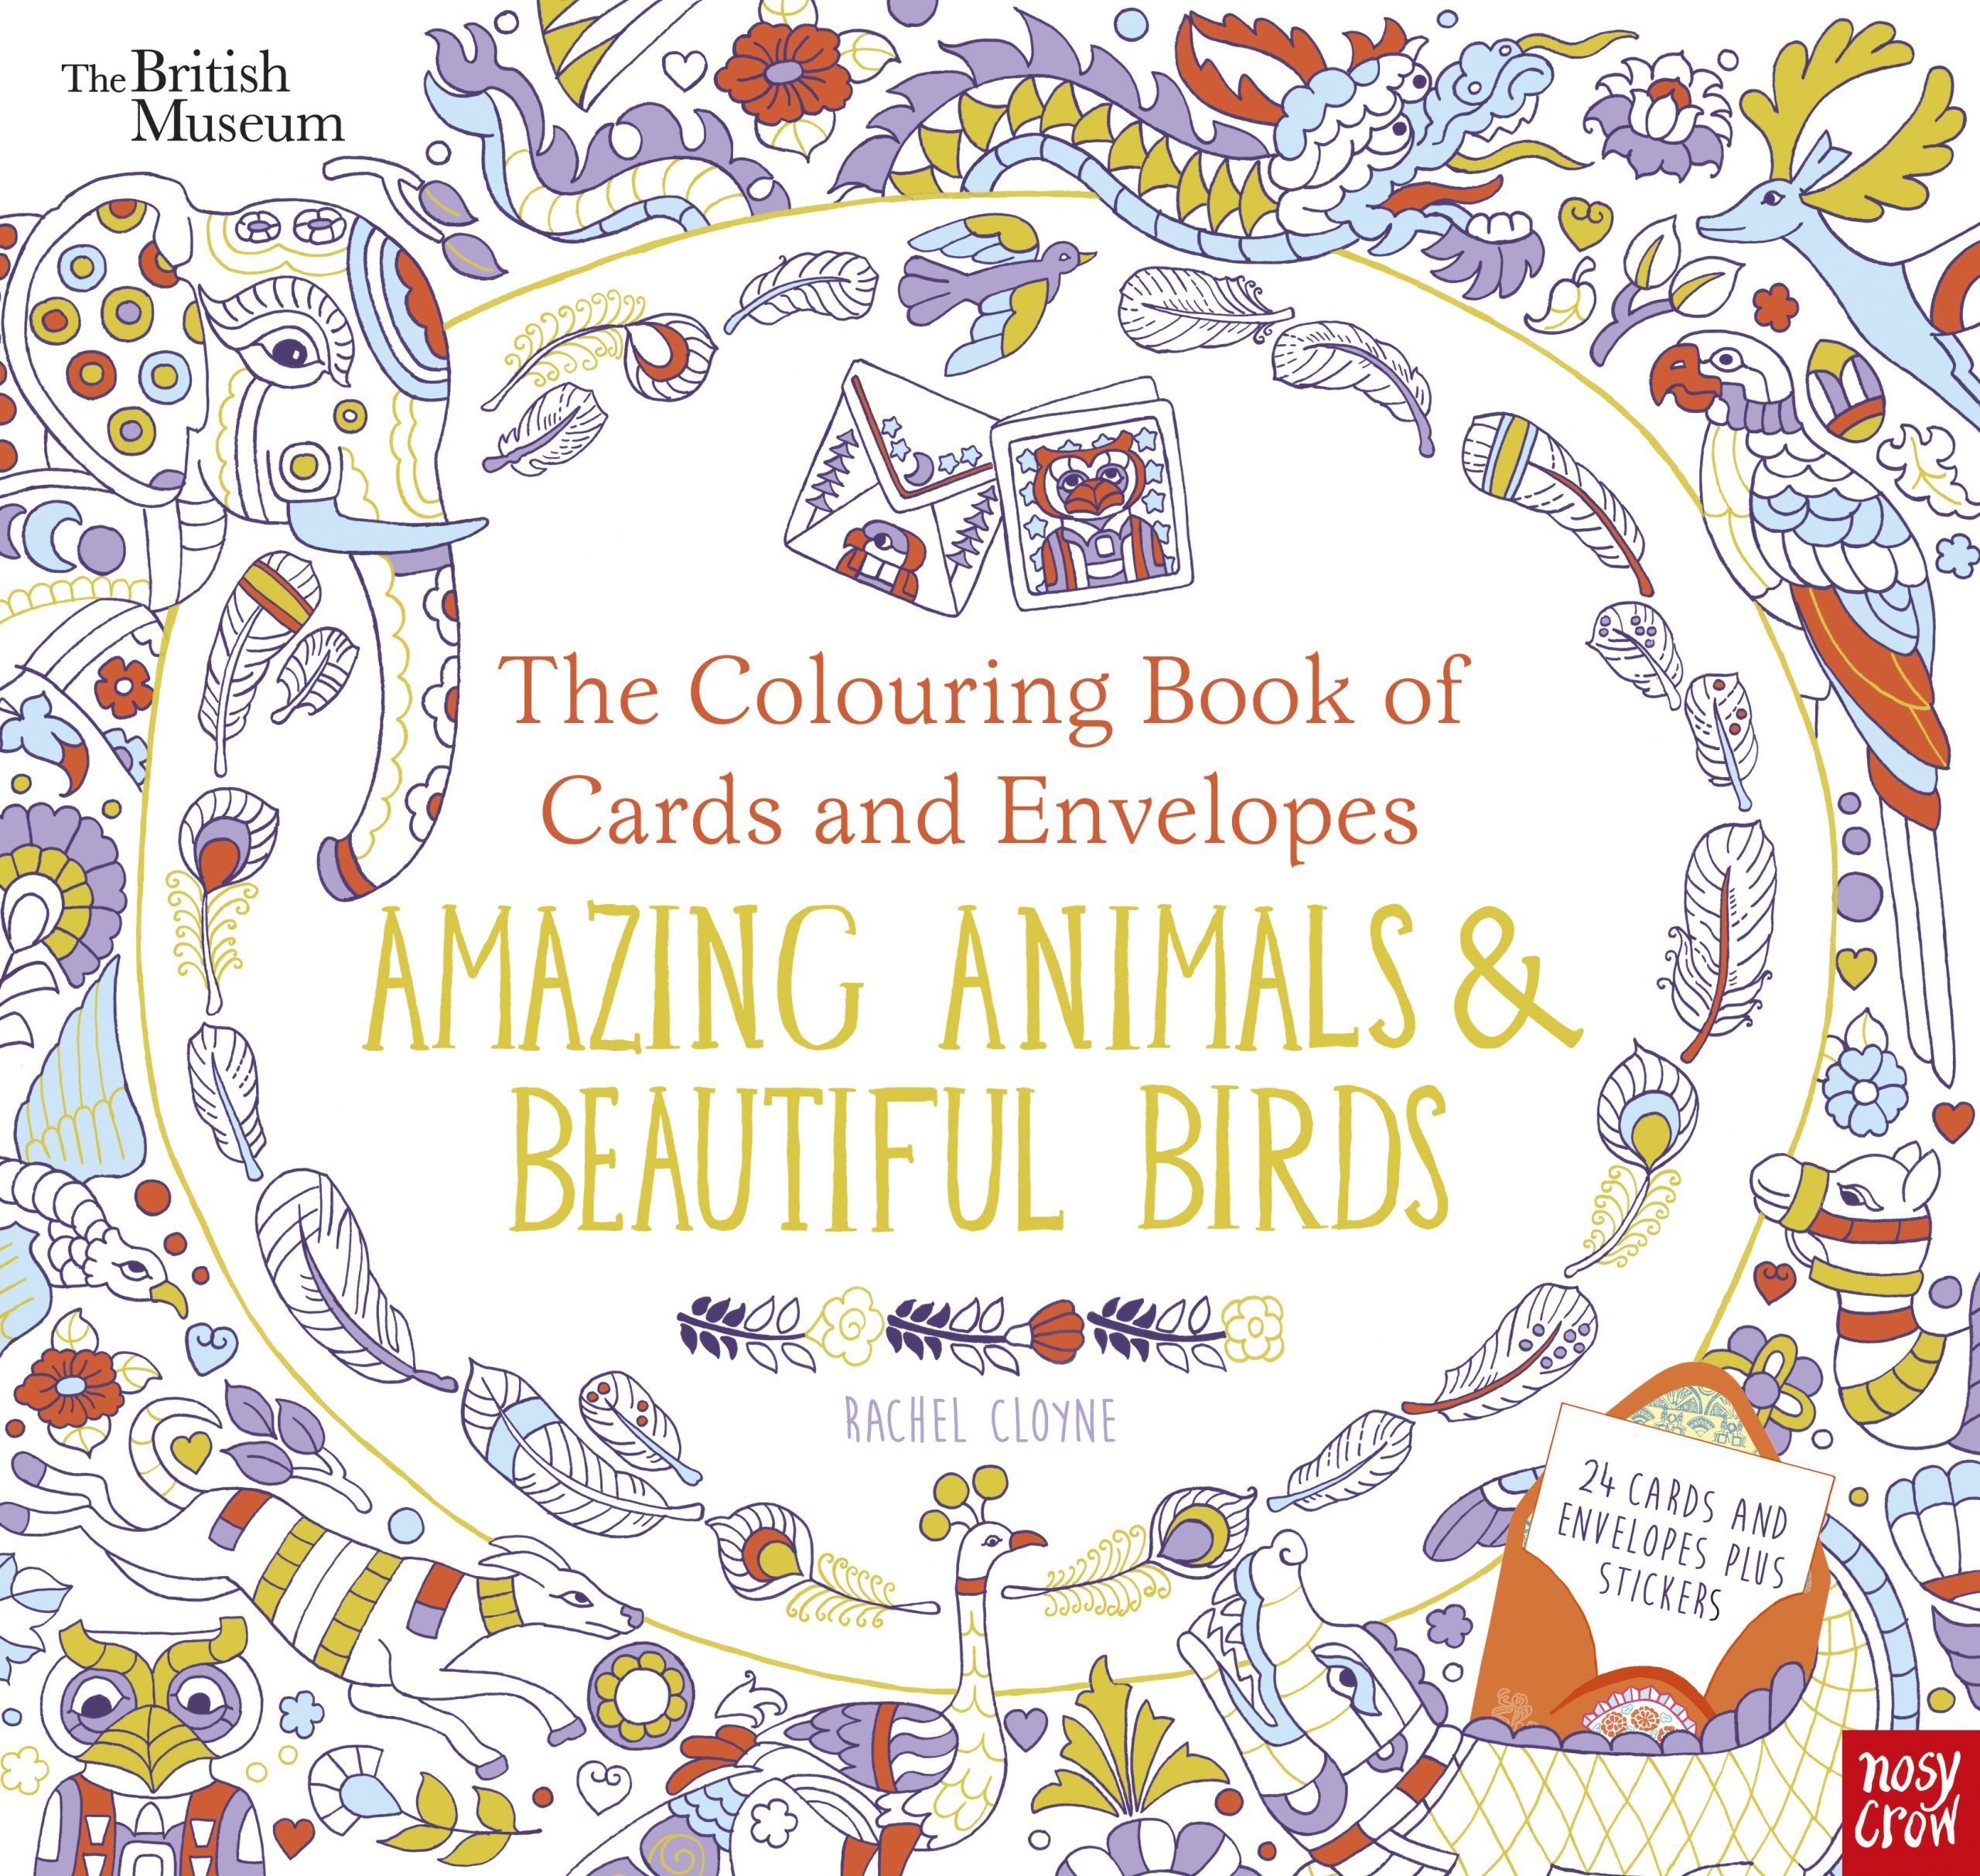 Adult Coloring Book Coloring Animals NEW